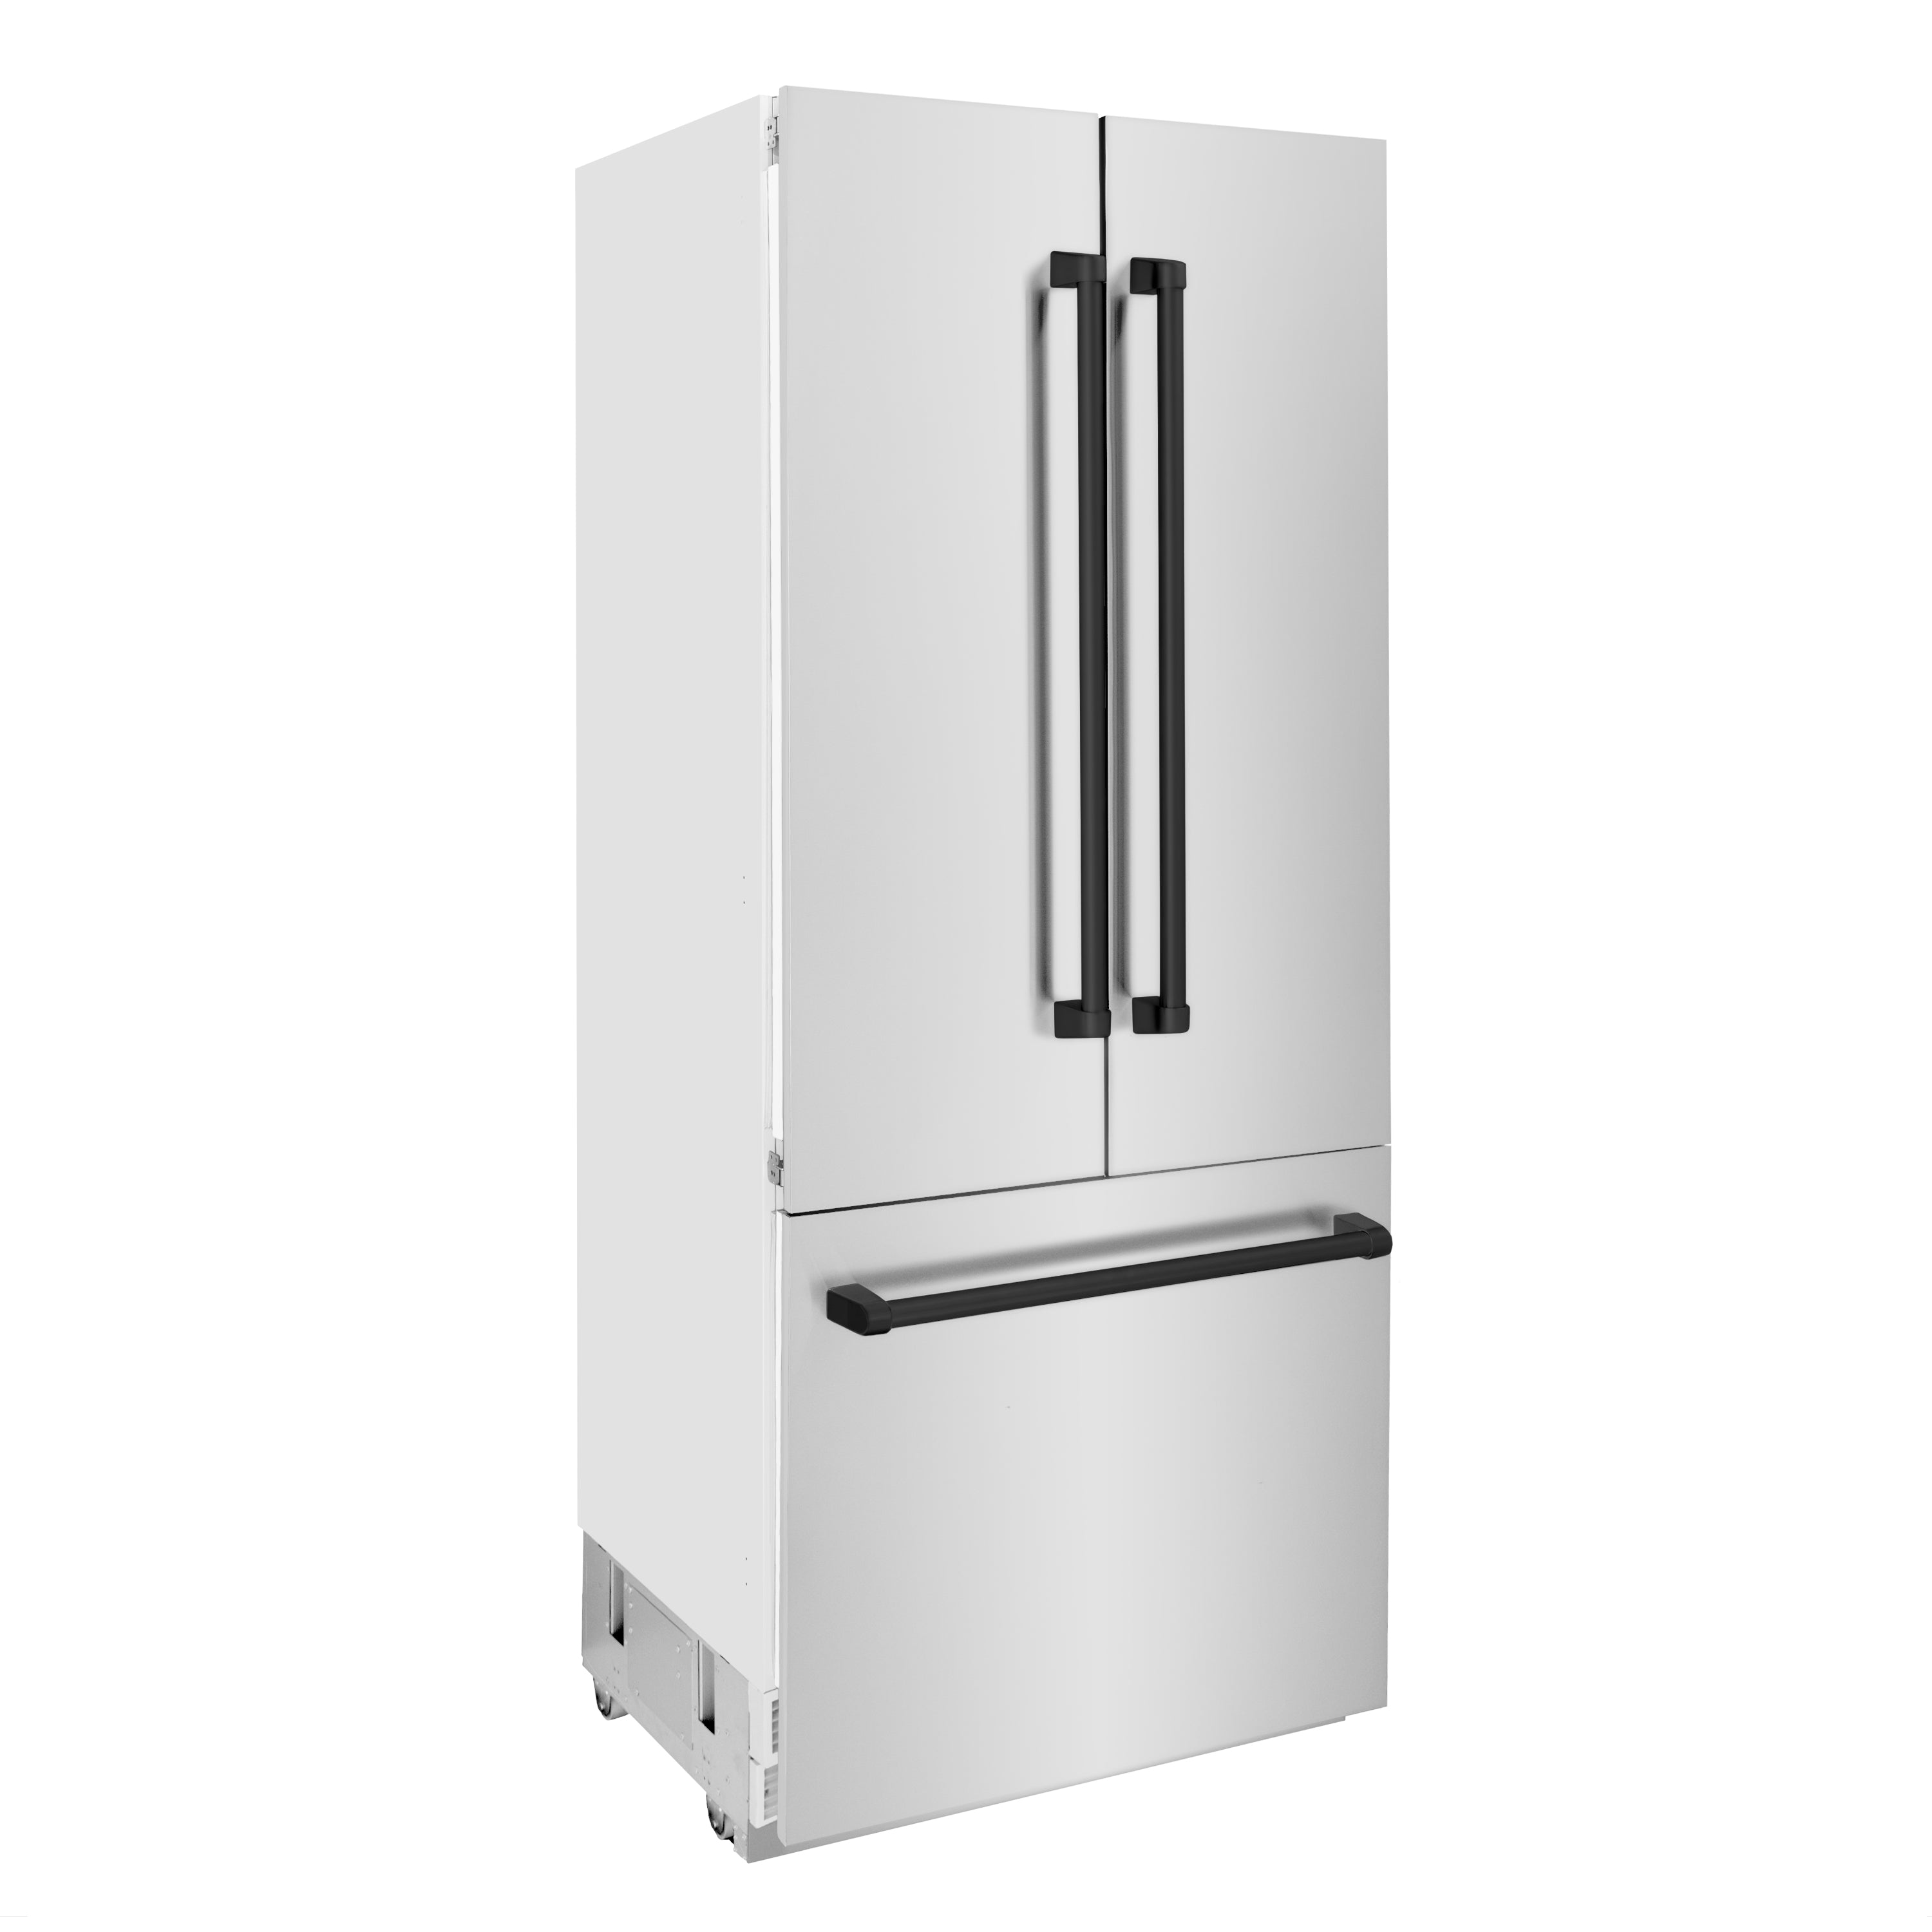 ZLINE 36” Autograph Edition 19.6 cu. ft. Built-in 3-Door French Door Refrigerator with Internal Water and Ice Dispenser in Stainless Steel with Matte Black Accents